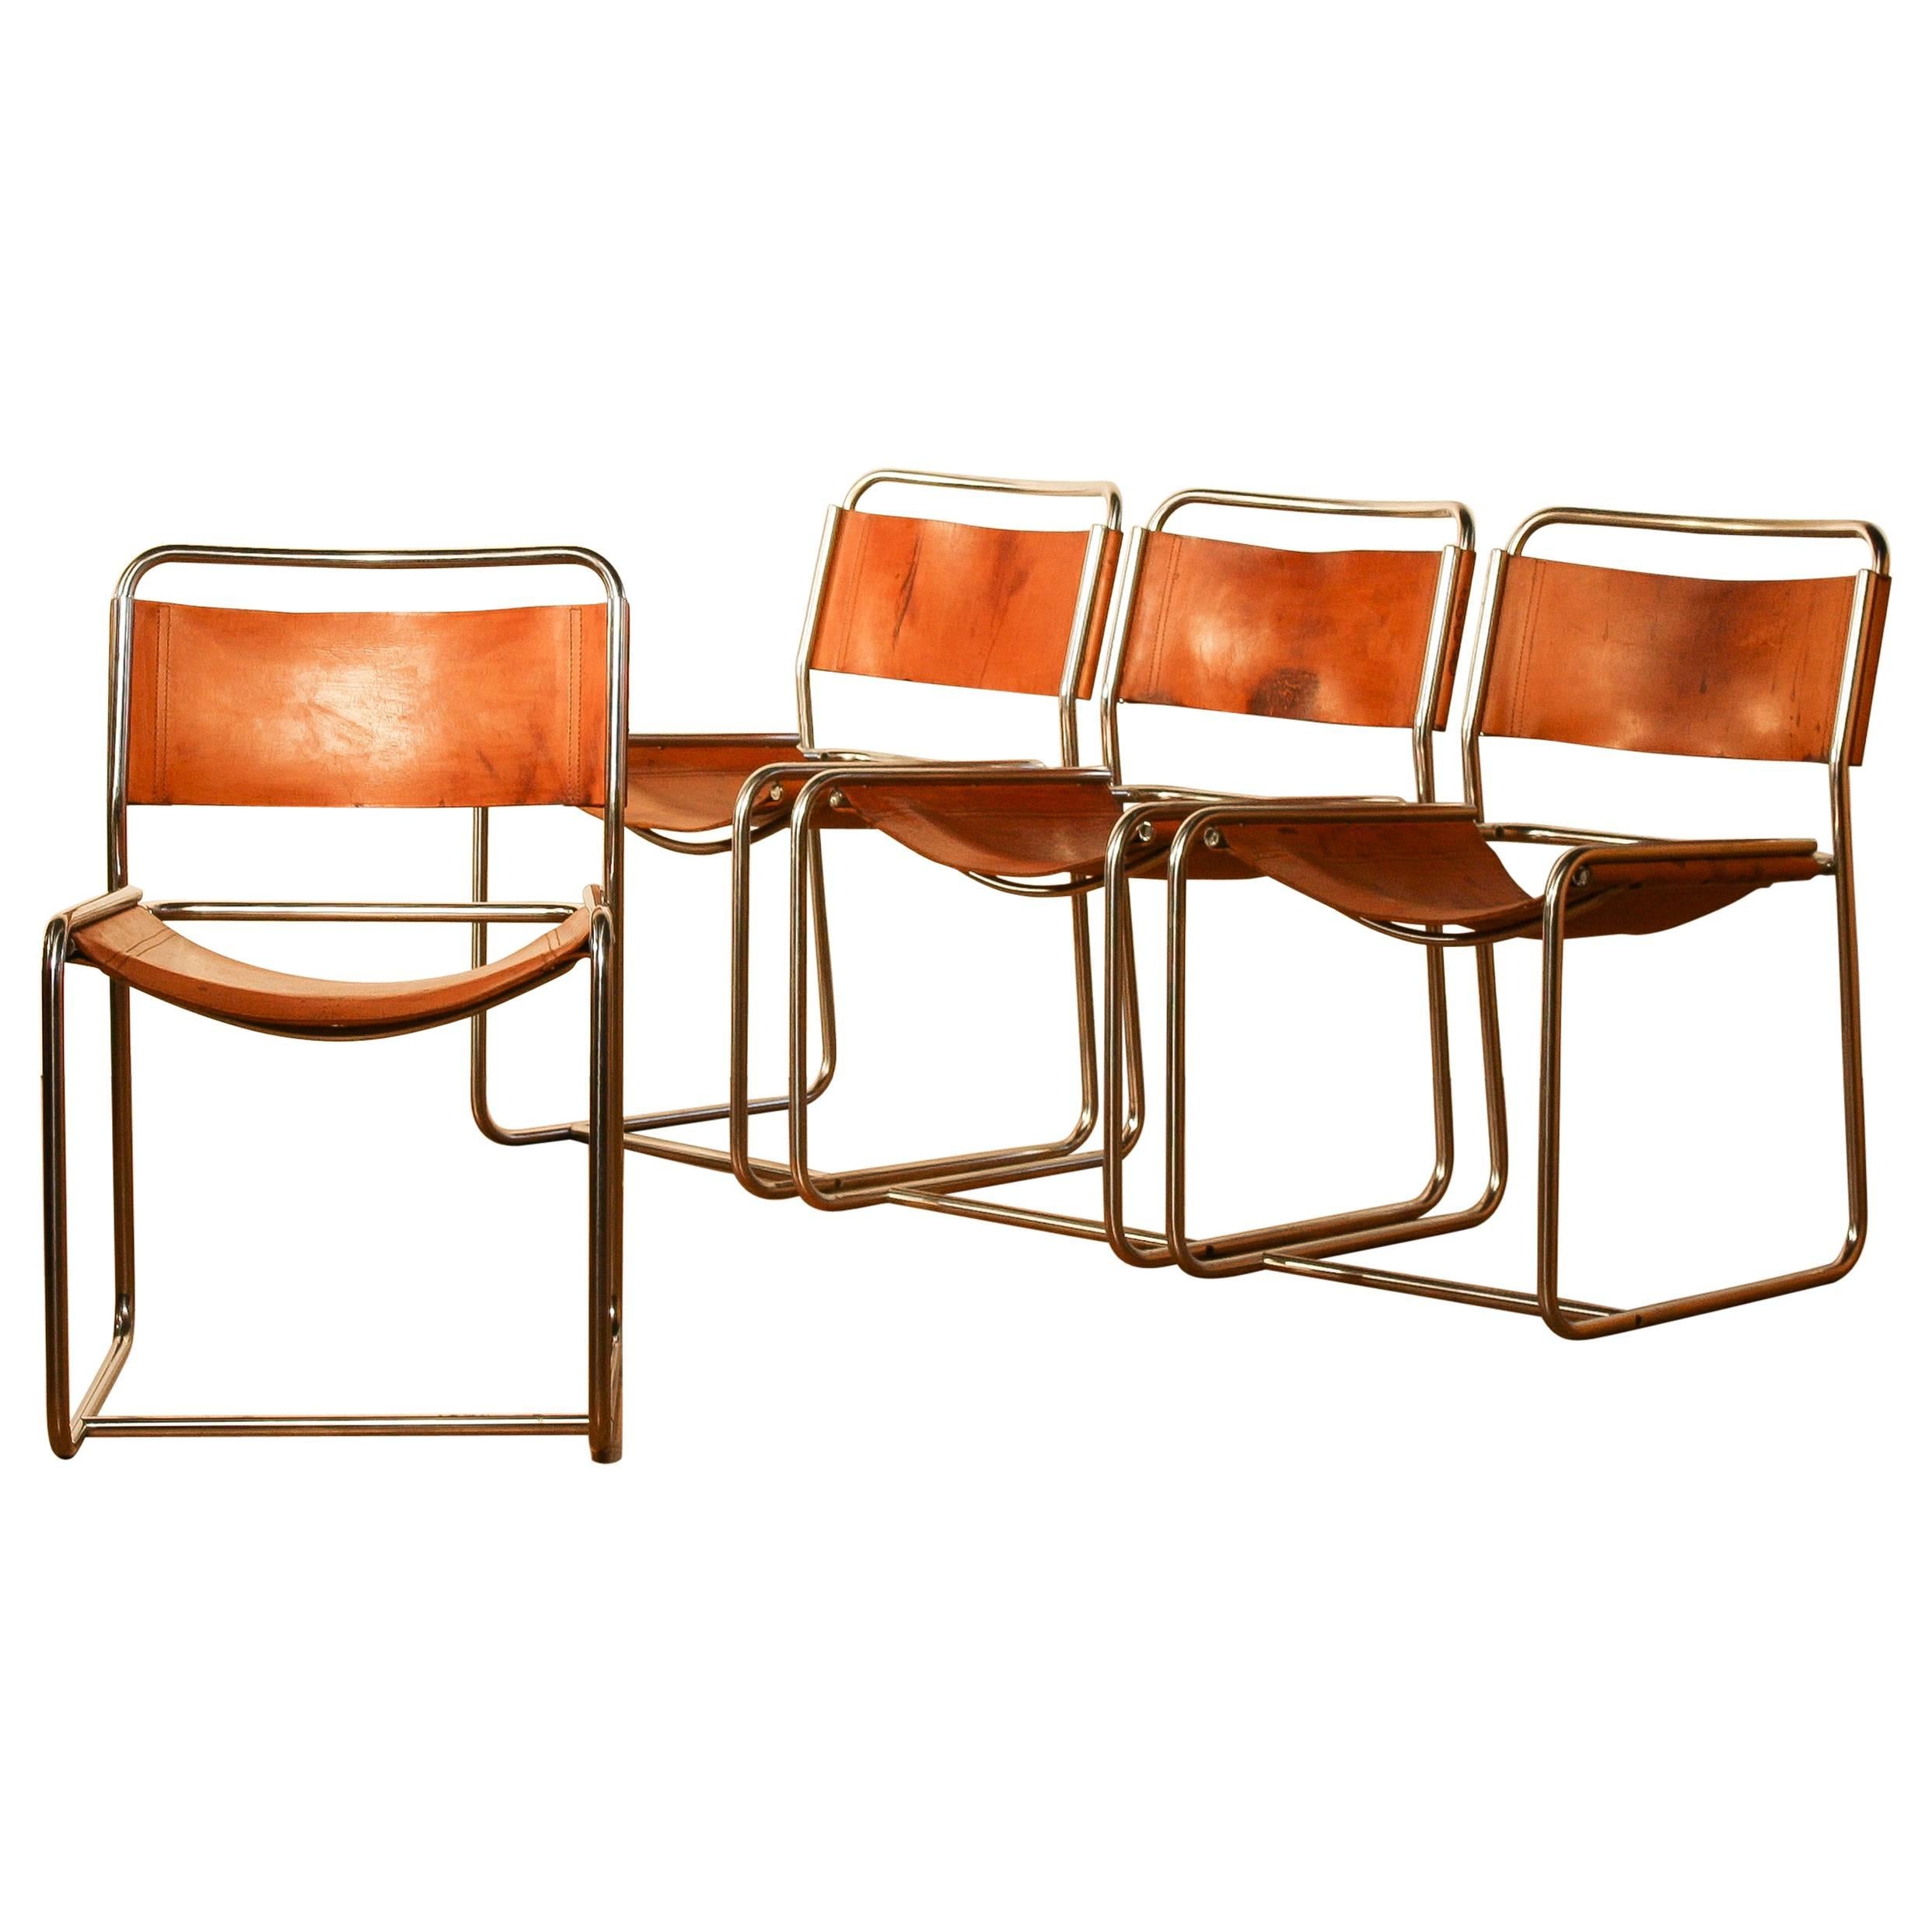  1970s Set of Four Dining Chairs by Paul Ibens & Clair Bataille for 't Spectrum